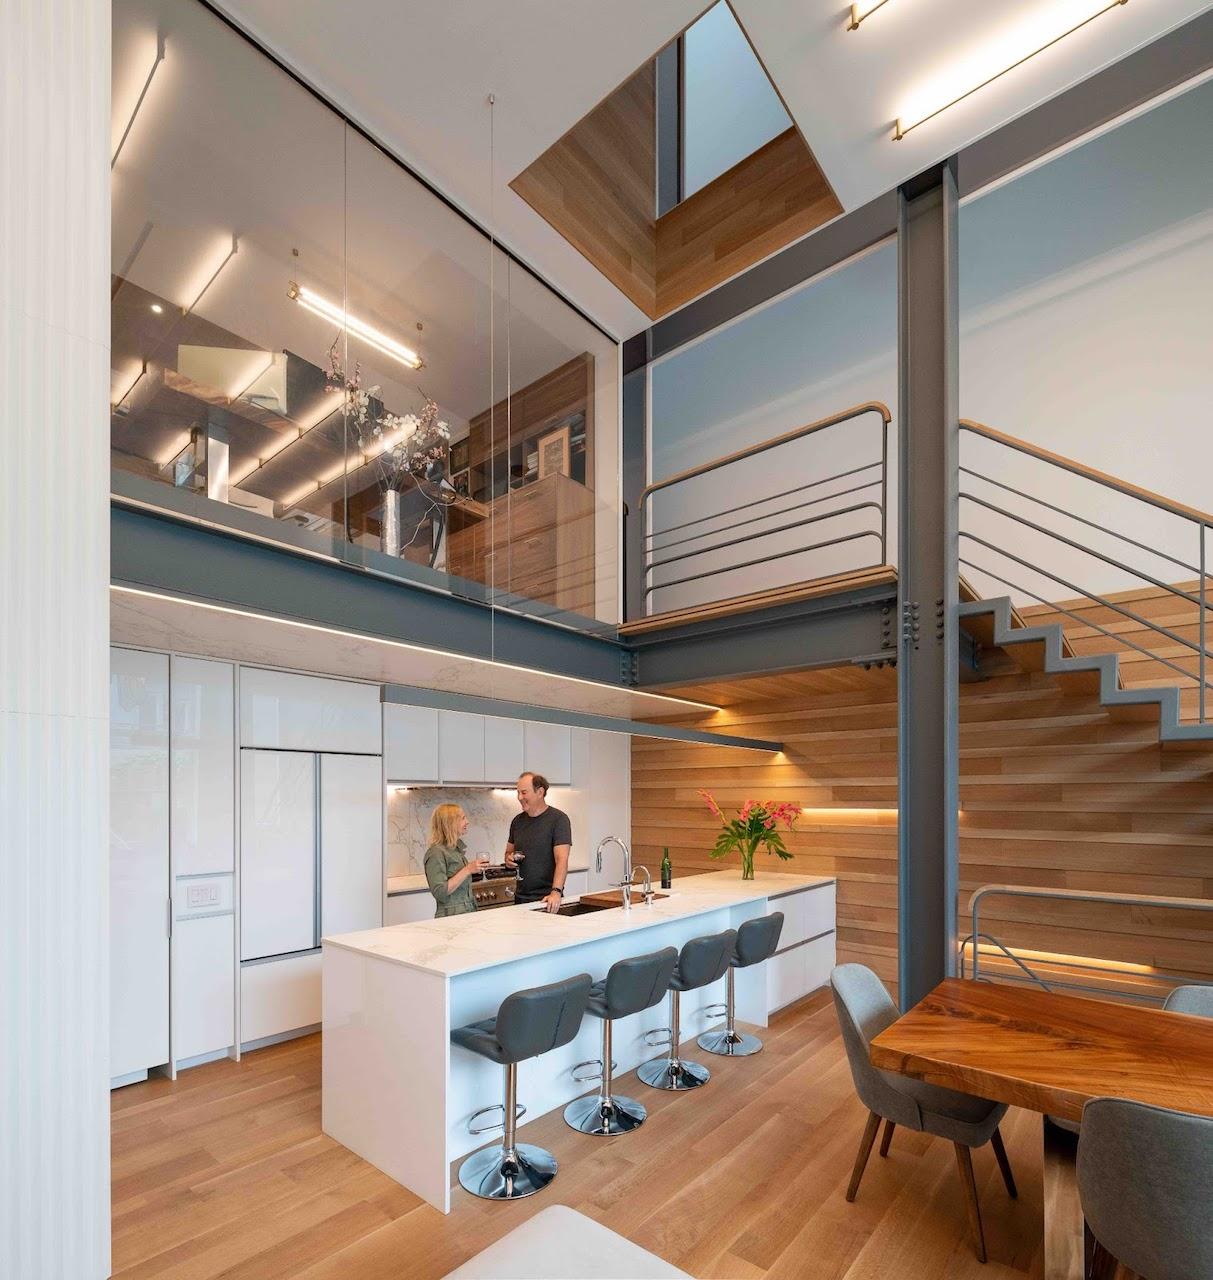 This Brooklyn Family Home is Built Like a Box Within a Box